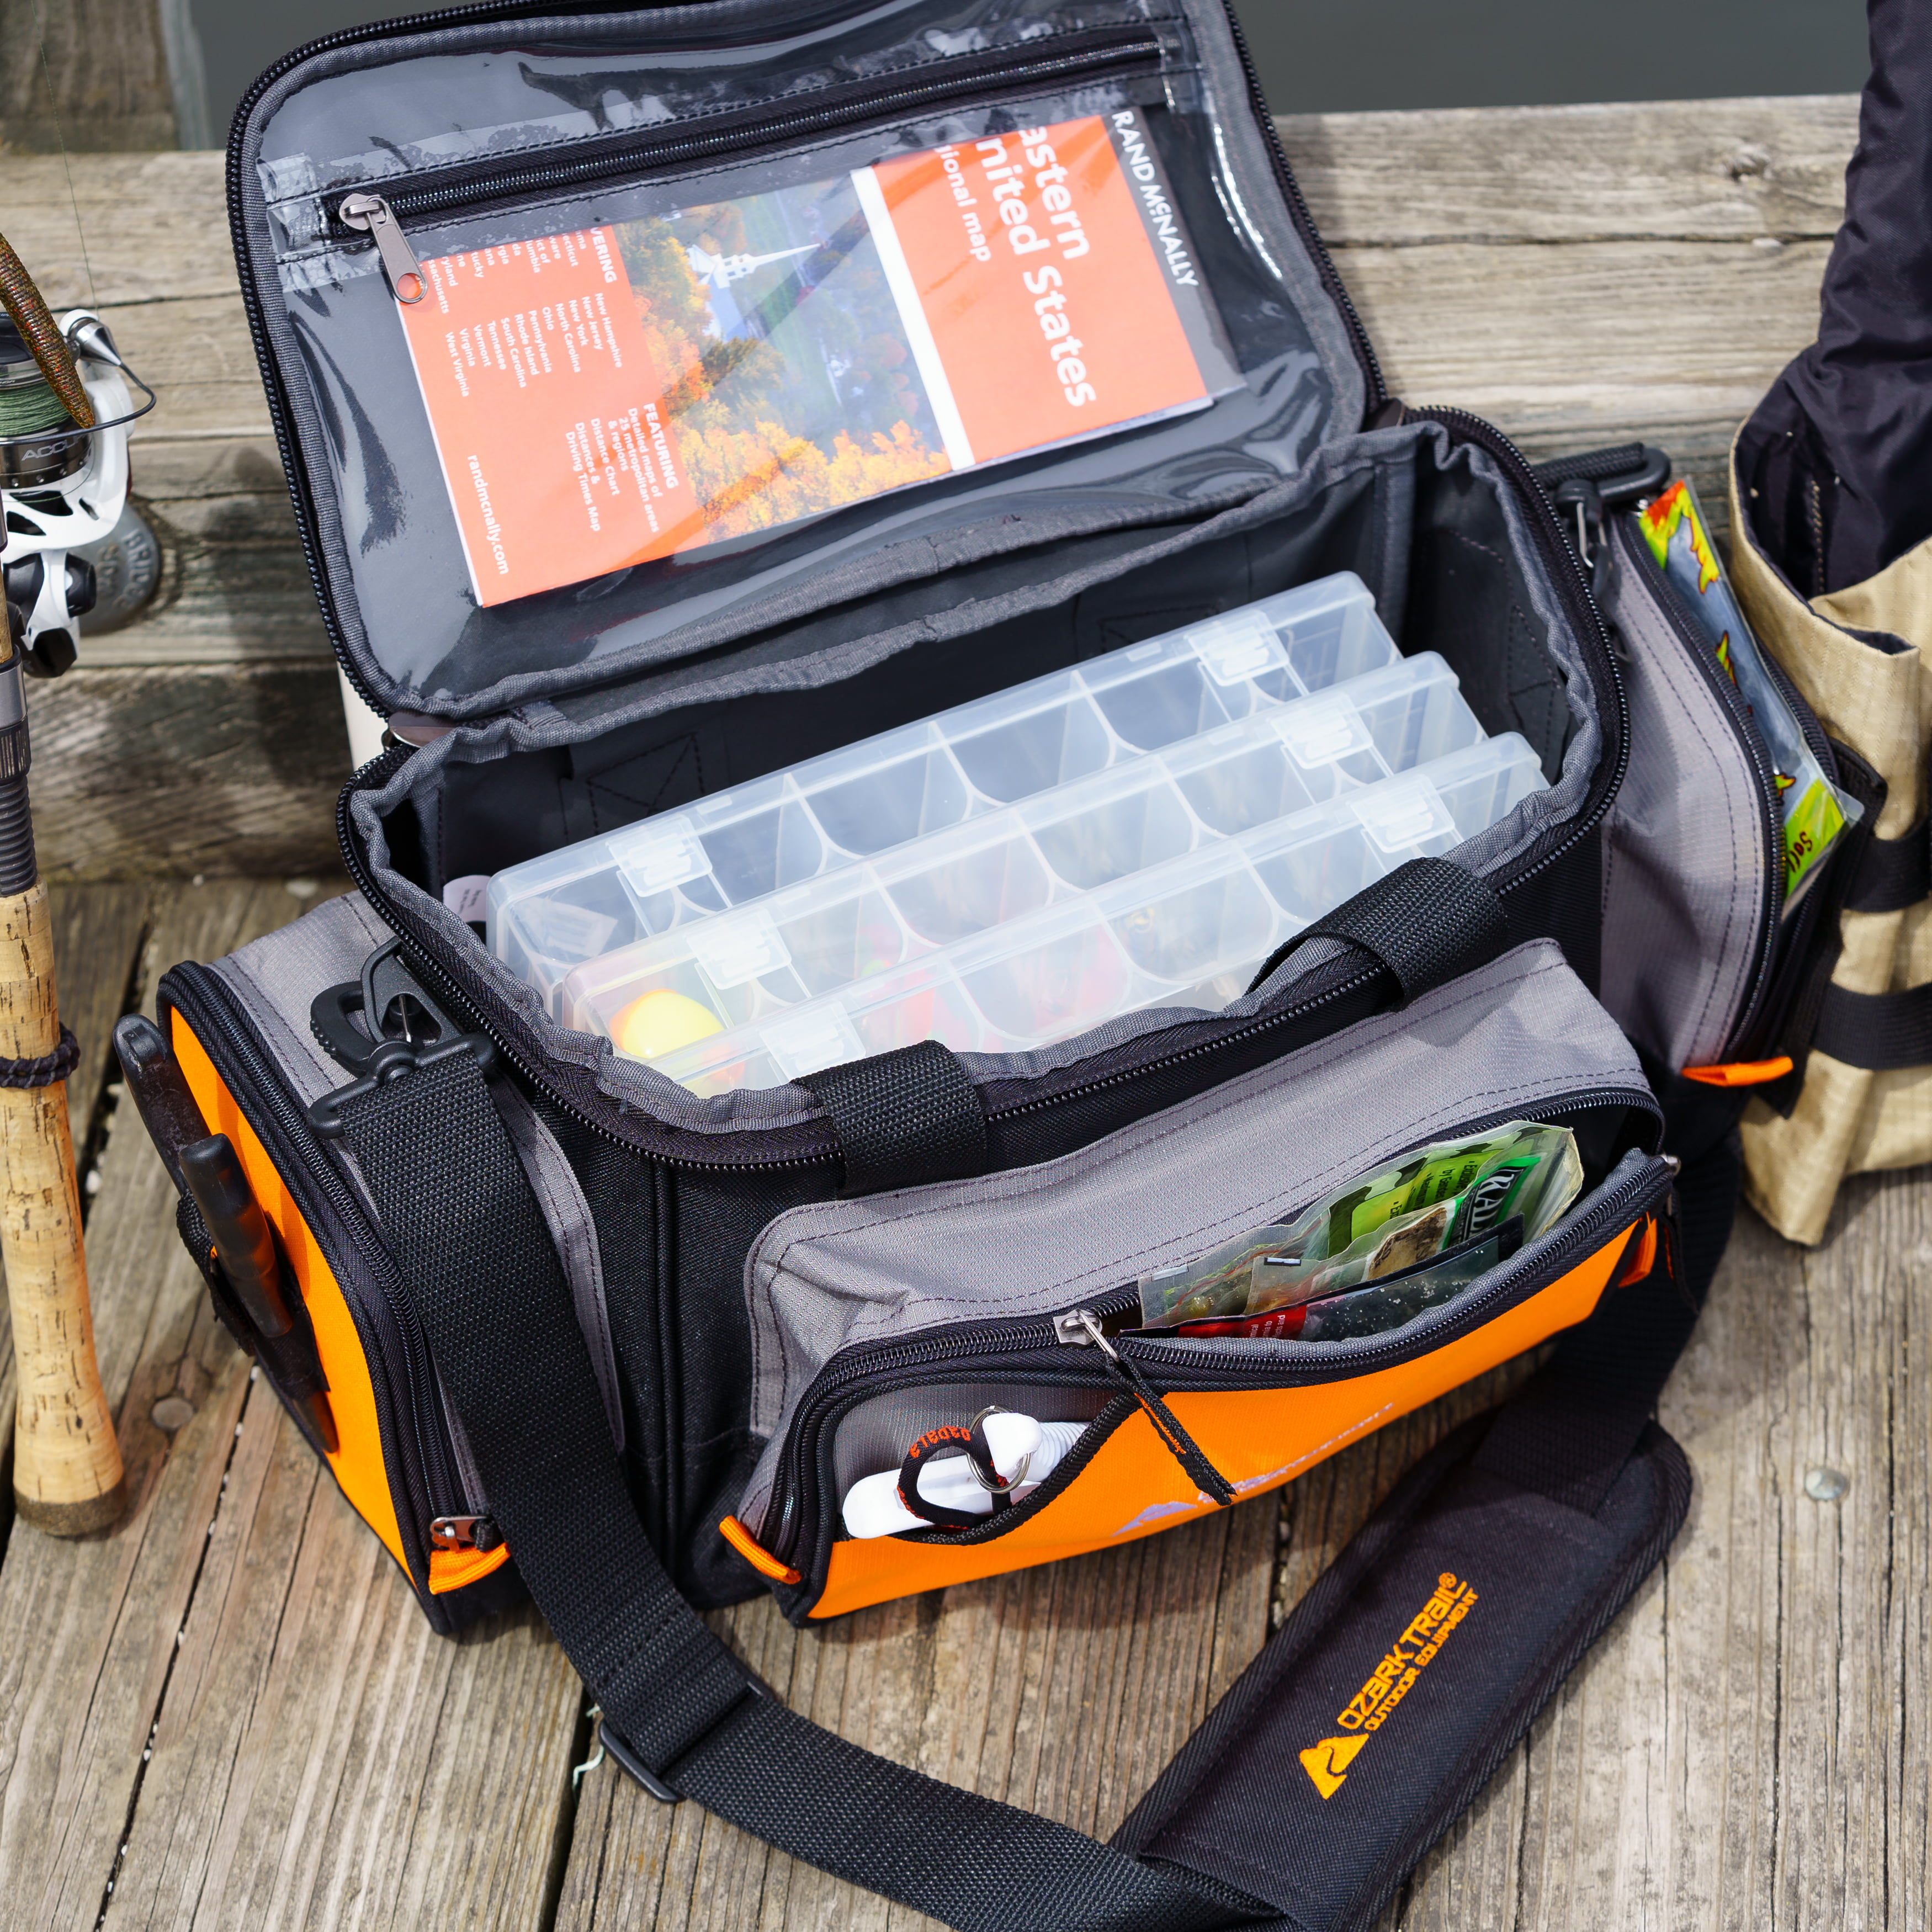 Best Fishing Bags And Tackle Backpacks Wired2Fish, 52% OFF